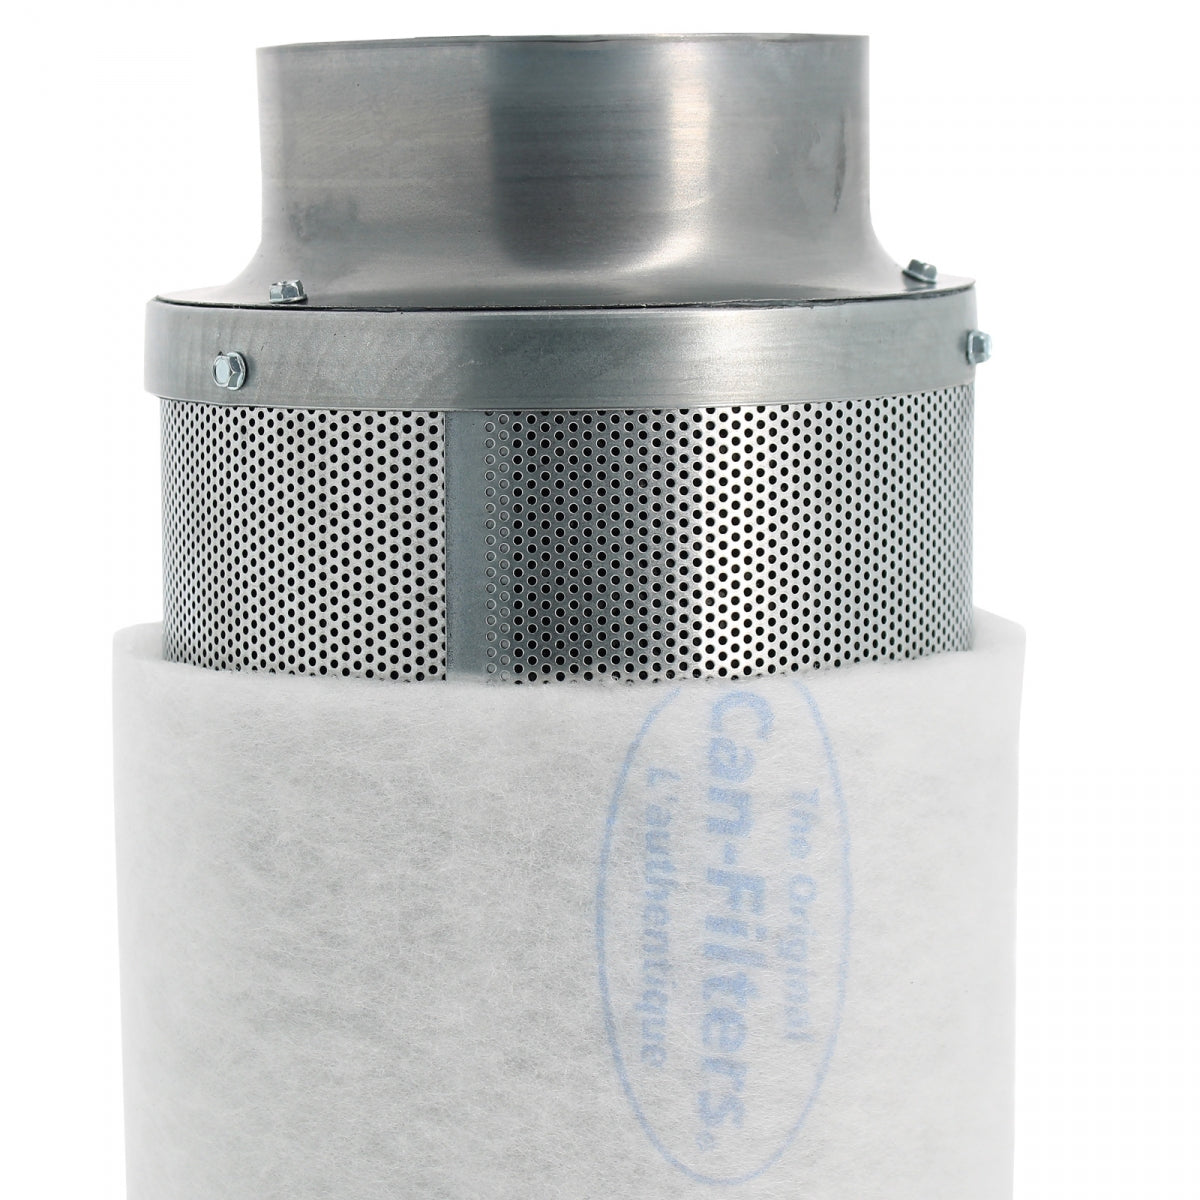 Can-Lite-Filter 800 m3/h – 200 mm – Can-Filters